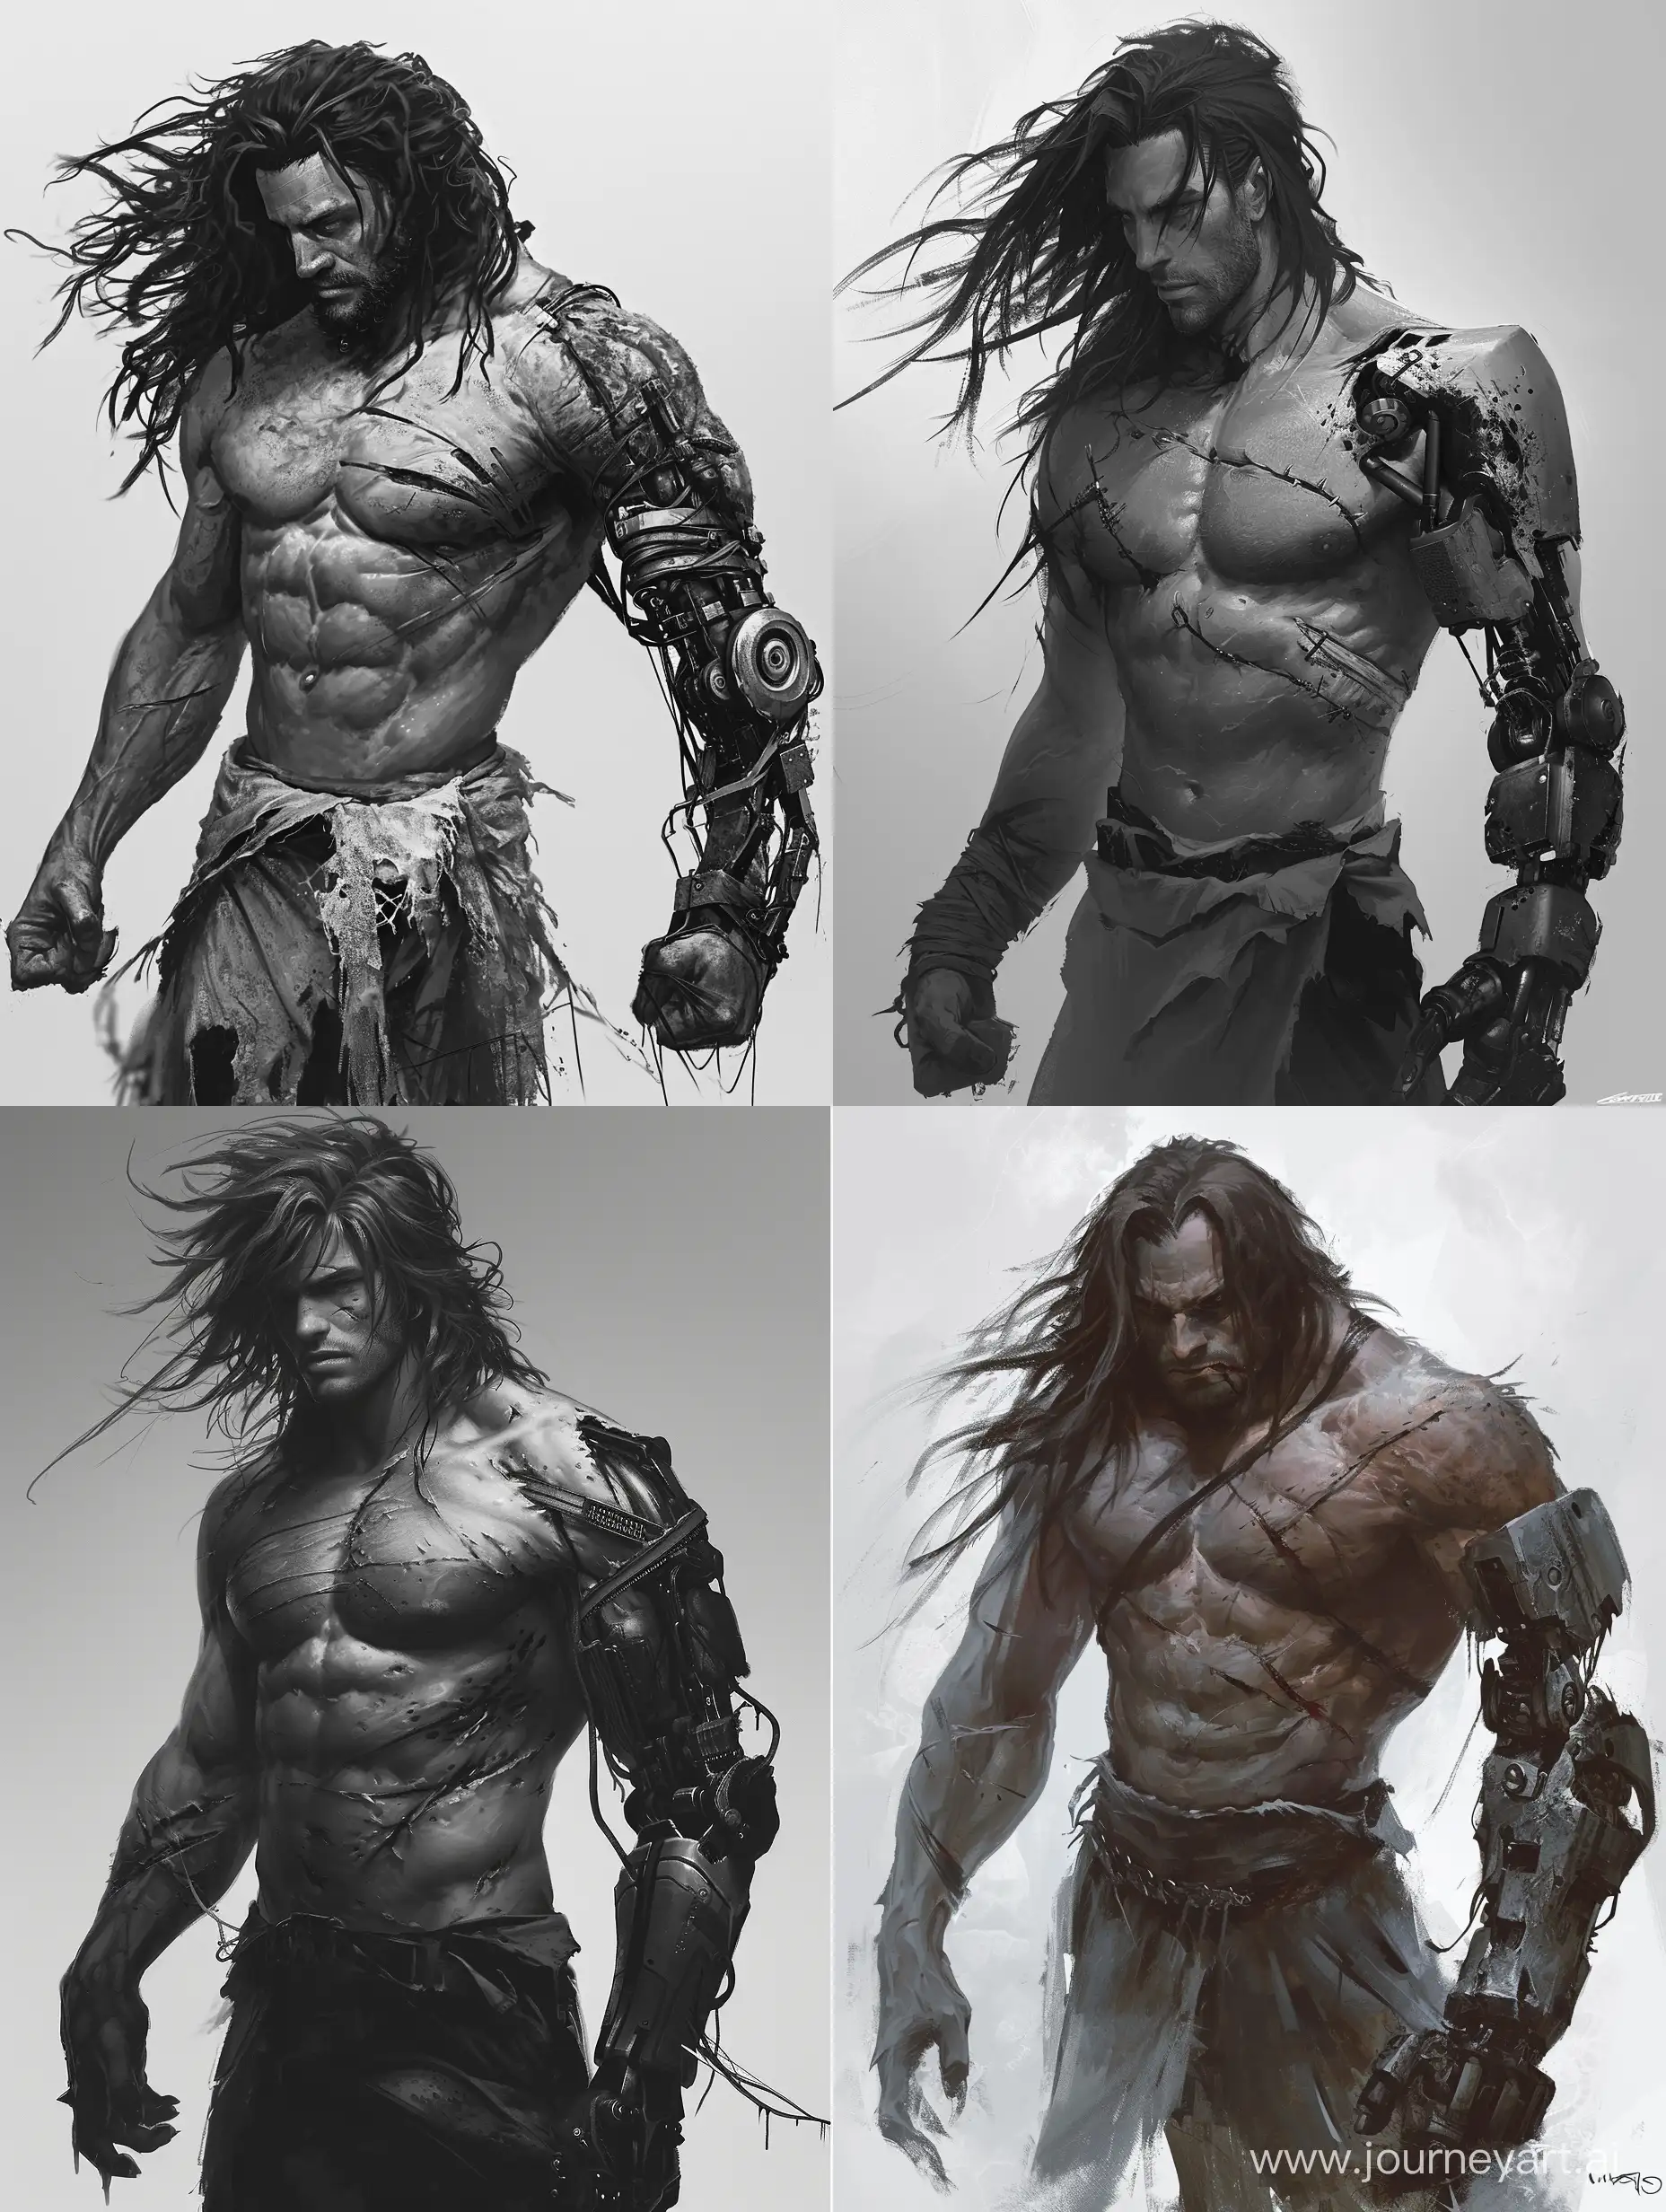 monster of a man with defined muscles, clothes torn and scars along his torso, complex prosthetic arm, chiseled jawline, long messy hair.